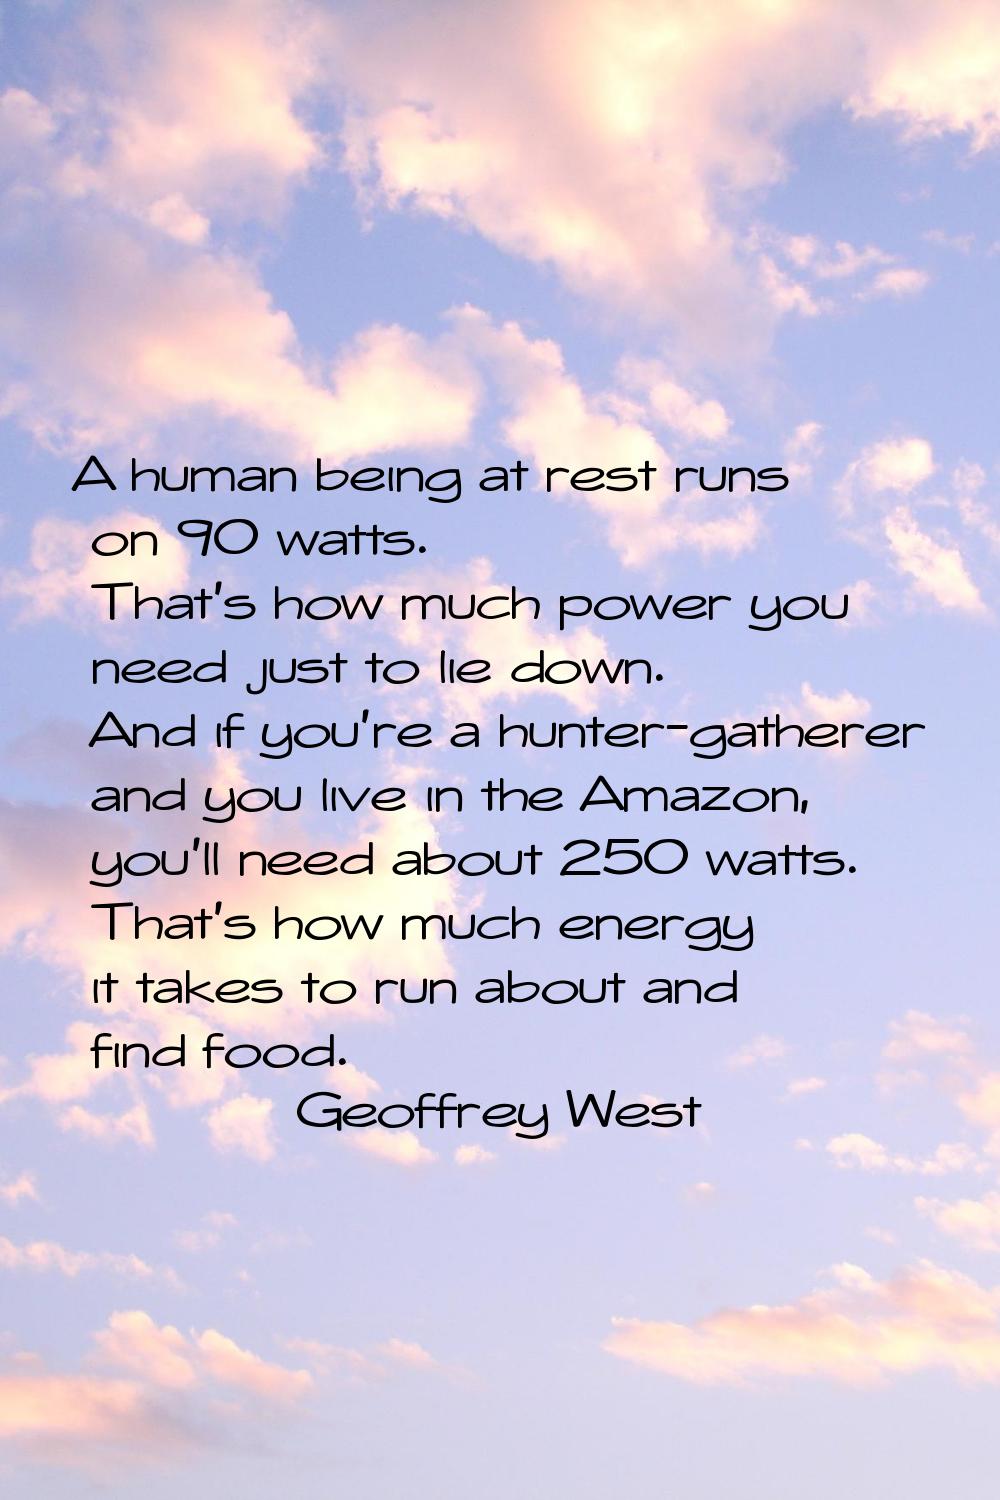 A human being at rest runs on 90 watts. That's how much power you need just to lie down. And if you